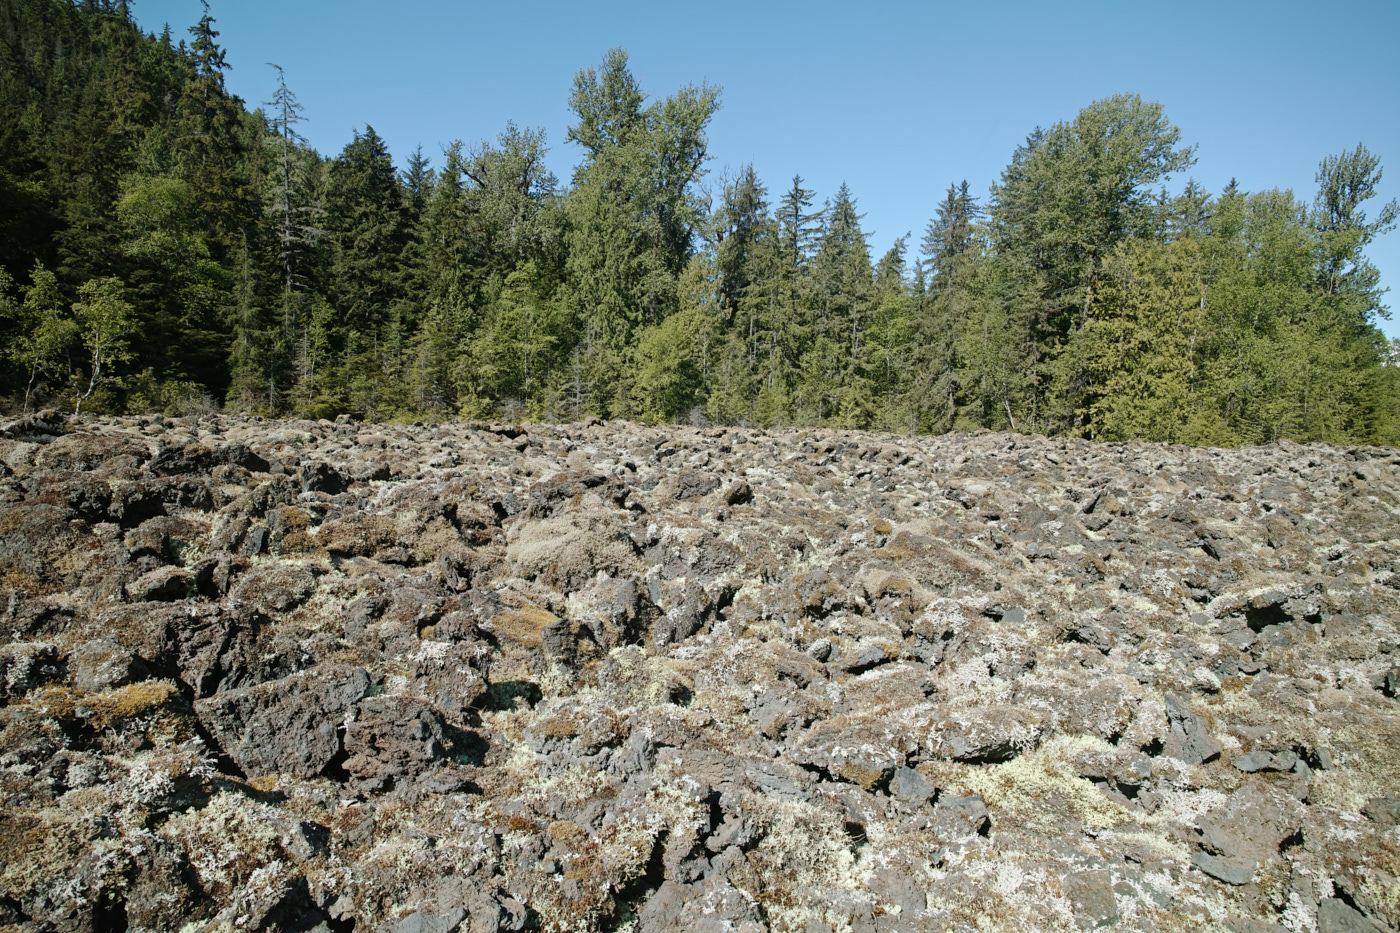 An early view of the sacred lava fields